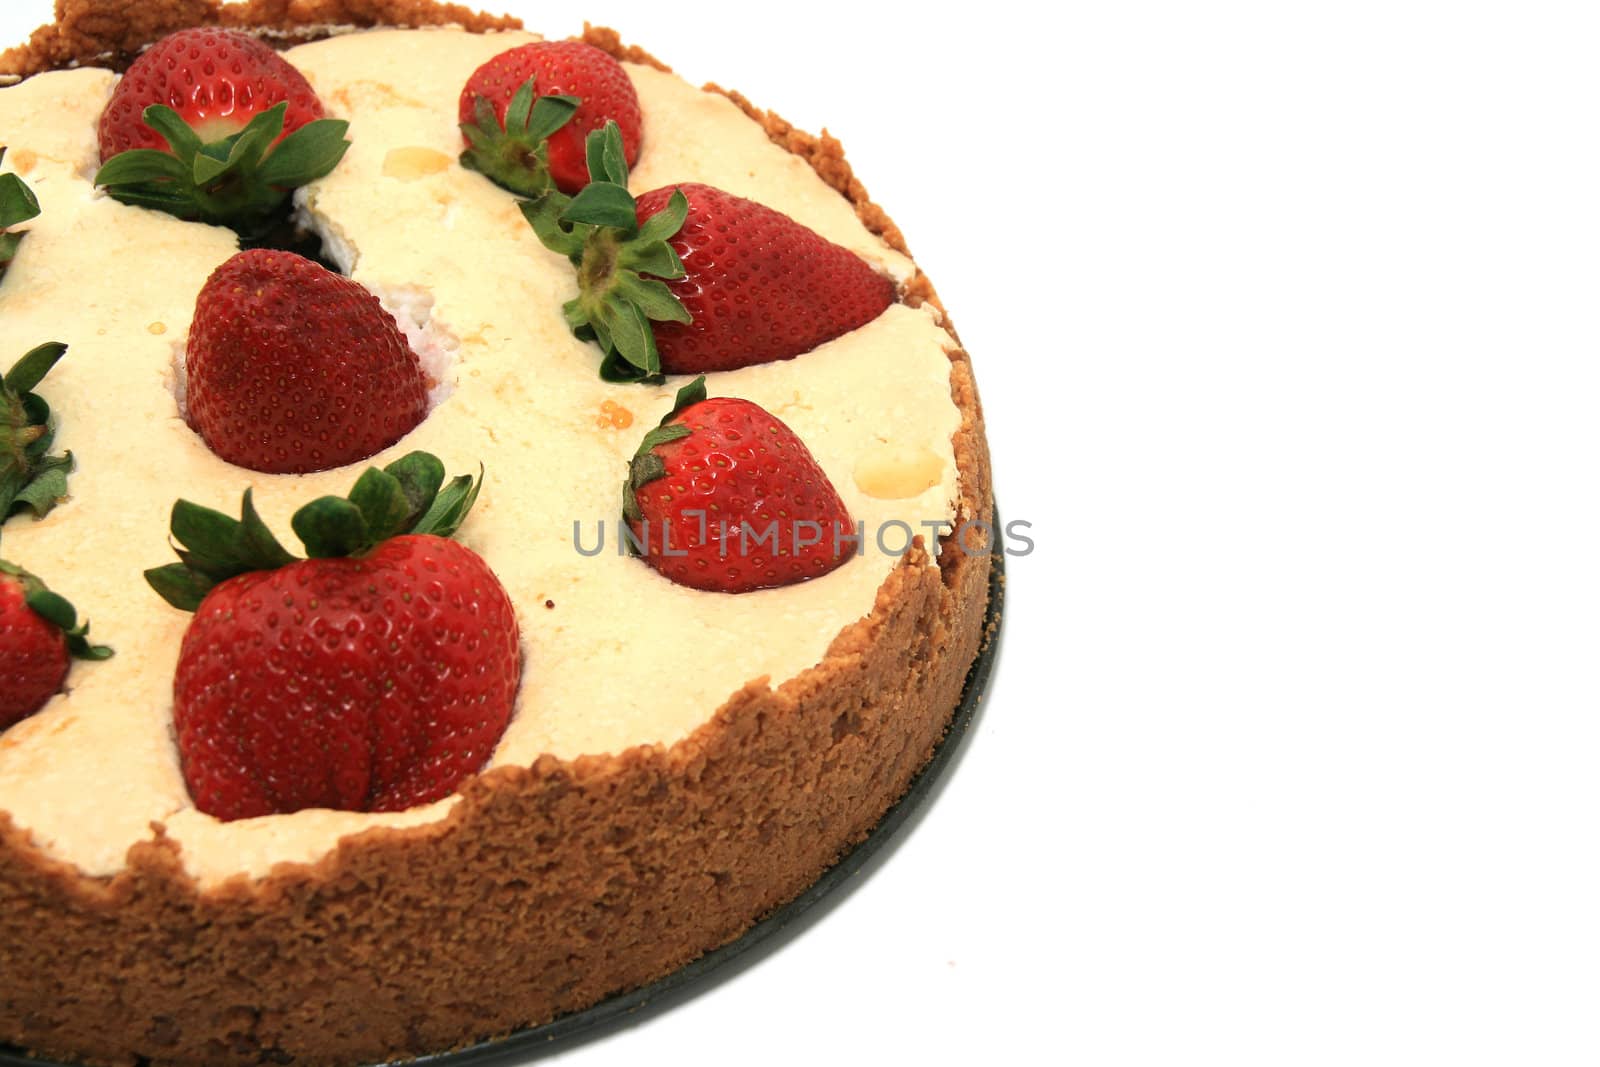 strawberry and chocolate cake over white background